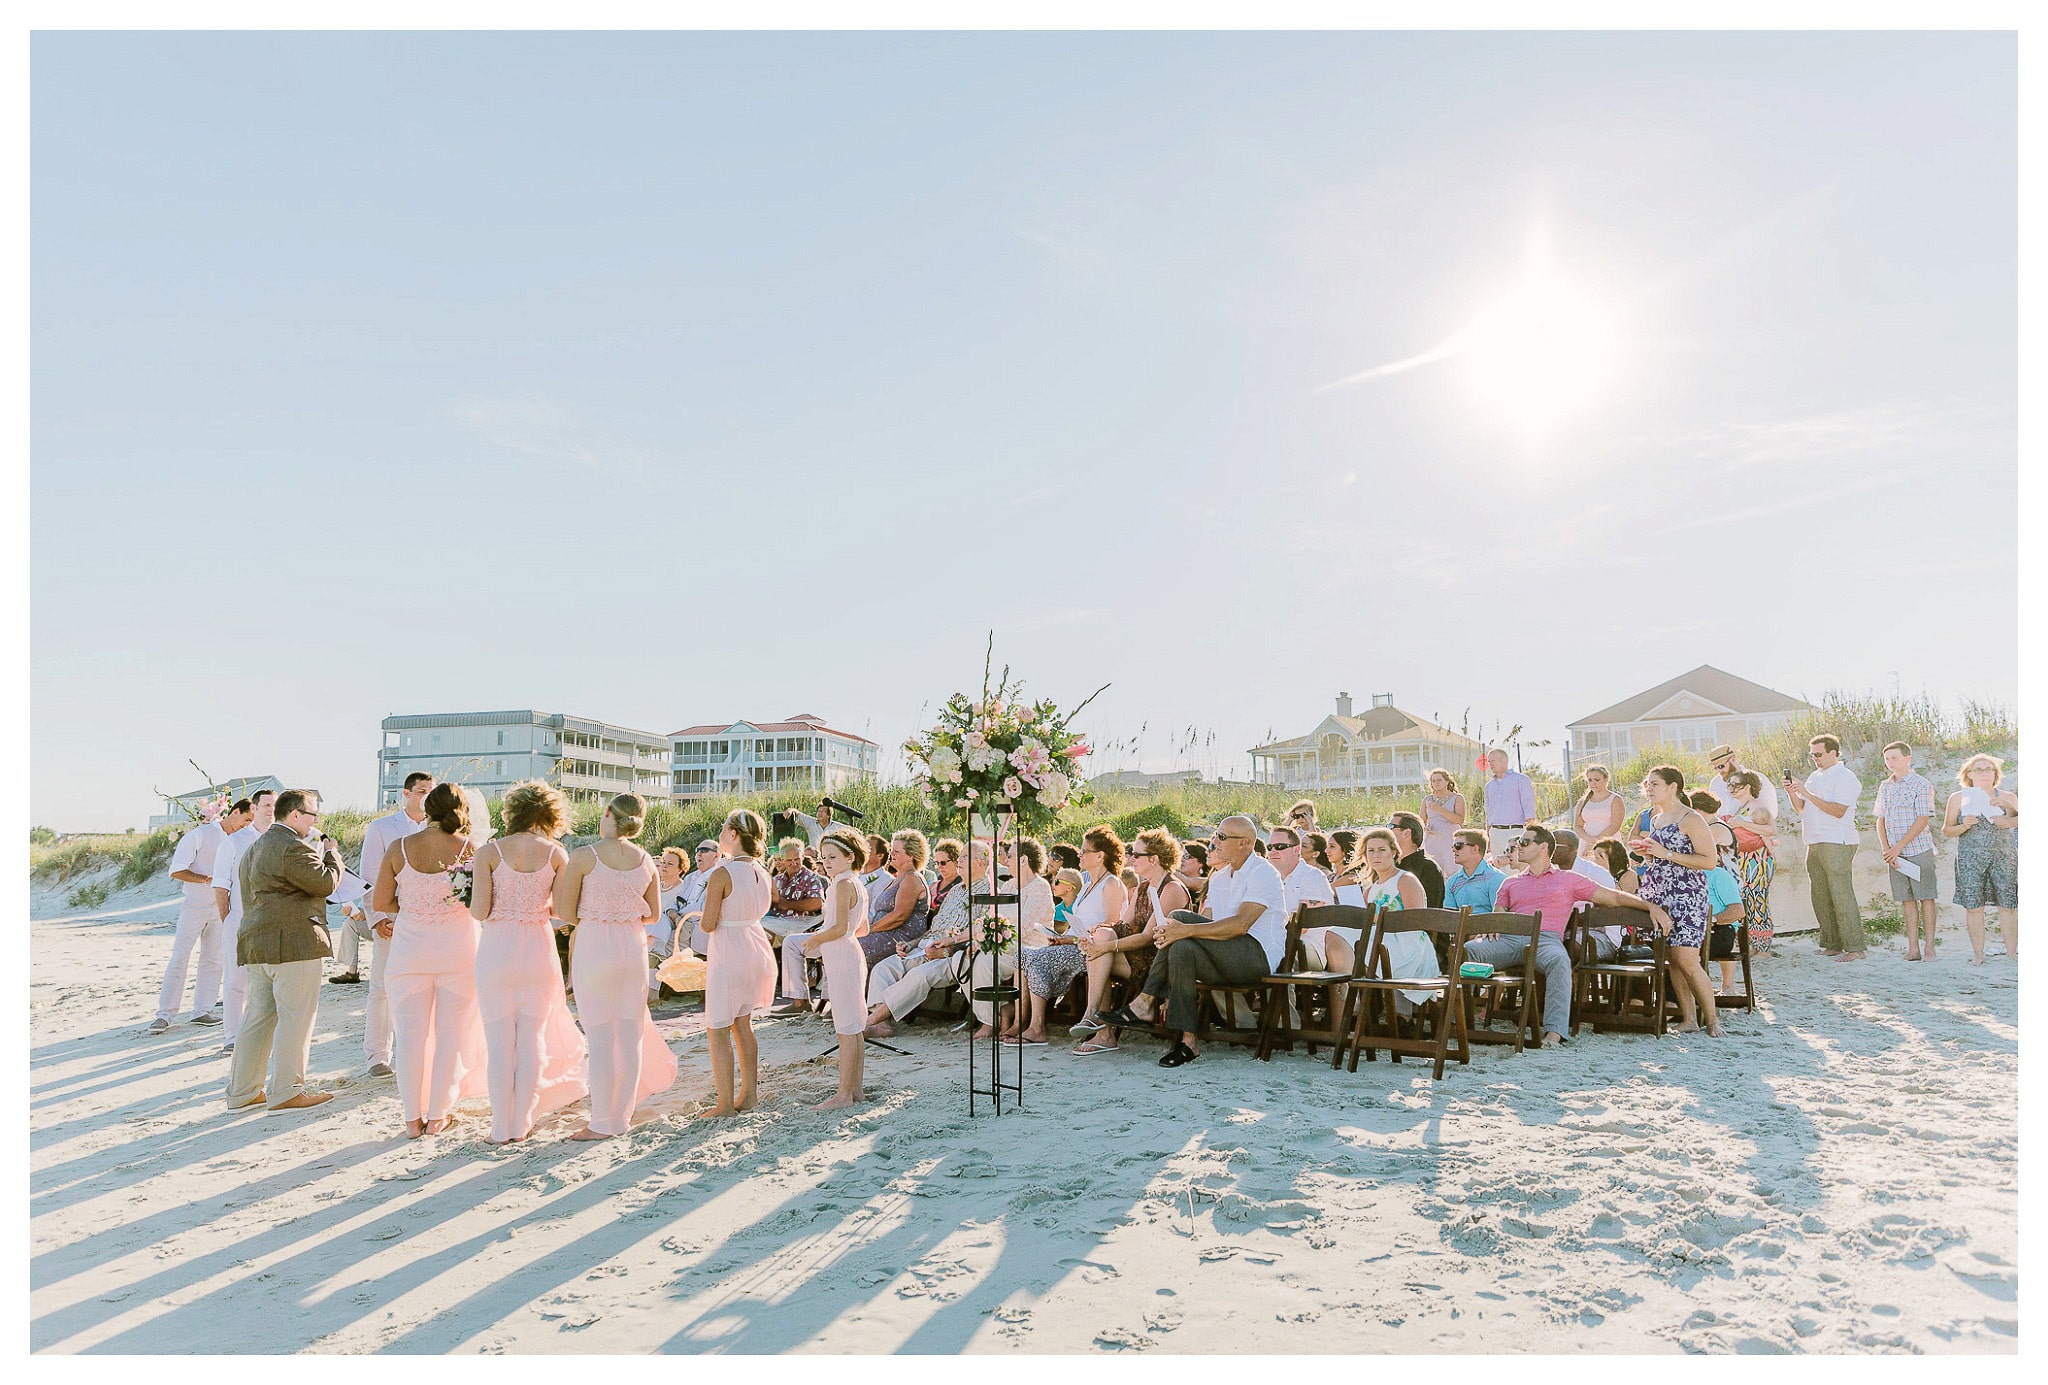 A picture from the water, toward the wedding and guests on the sand - Venue - Beach House Gulf Stream Breeze, Beach Realty Catering and Cake - Buttercream Cakes and Catering, LLC Flowers - Callas Florist Event Rentals - Event Works DJ - Scott Shaw